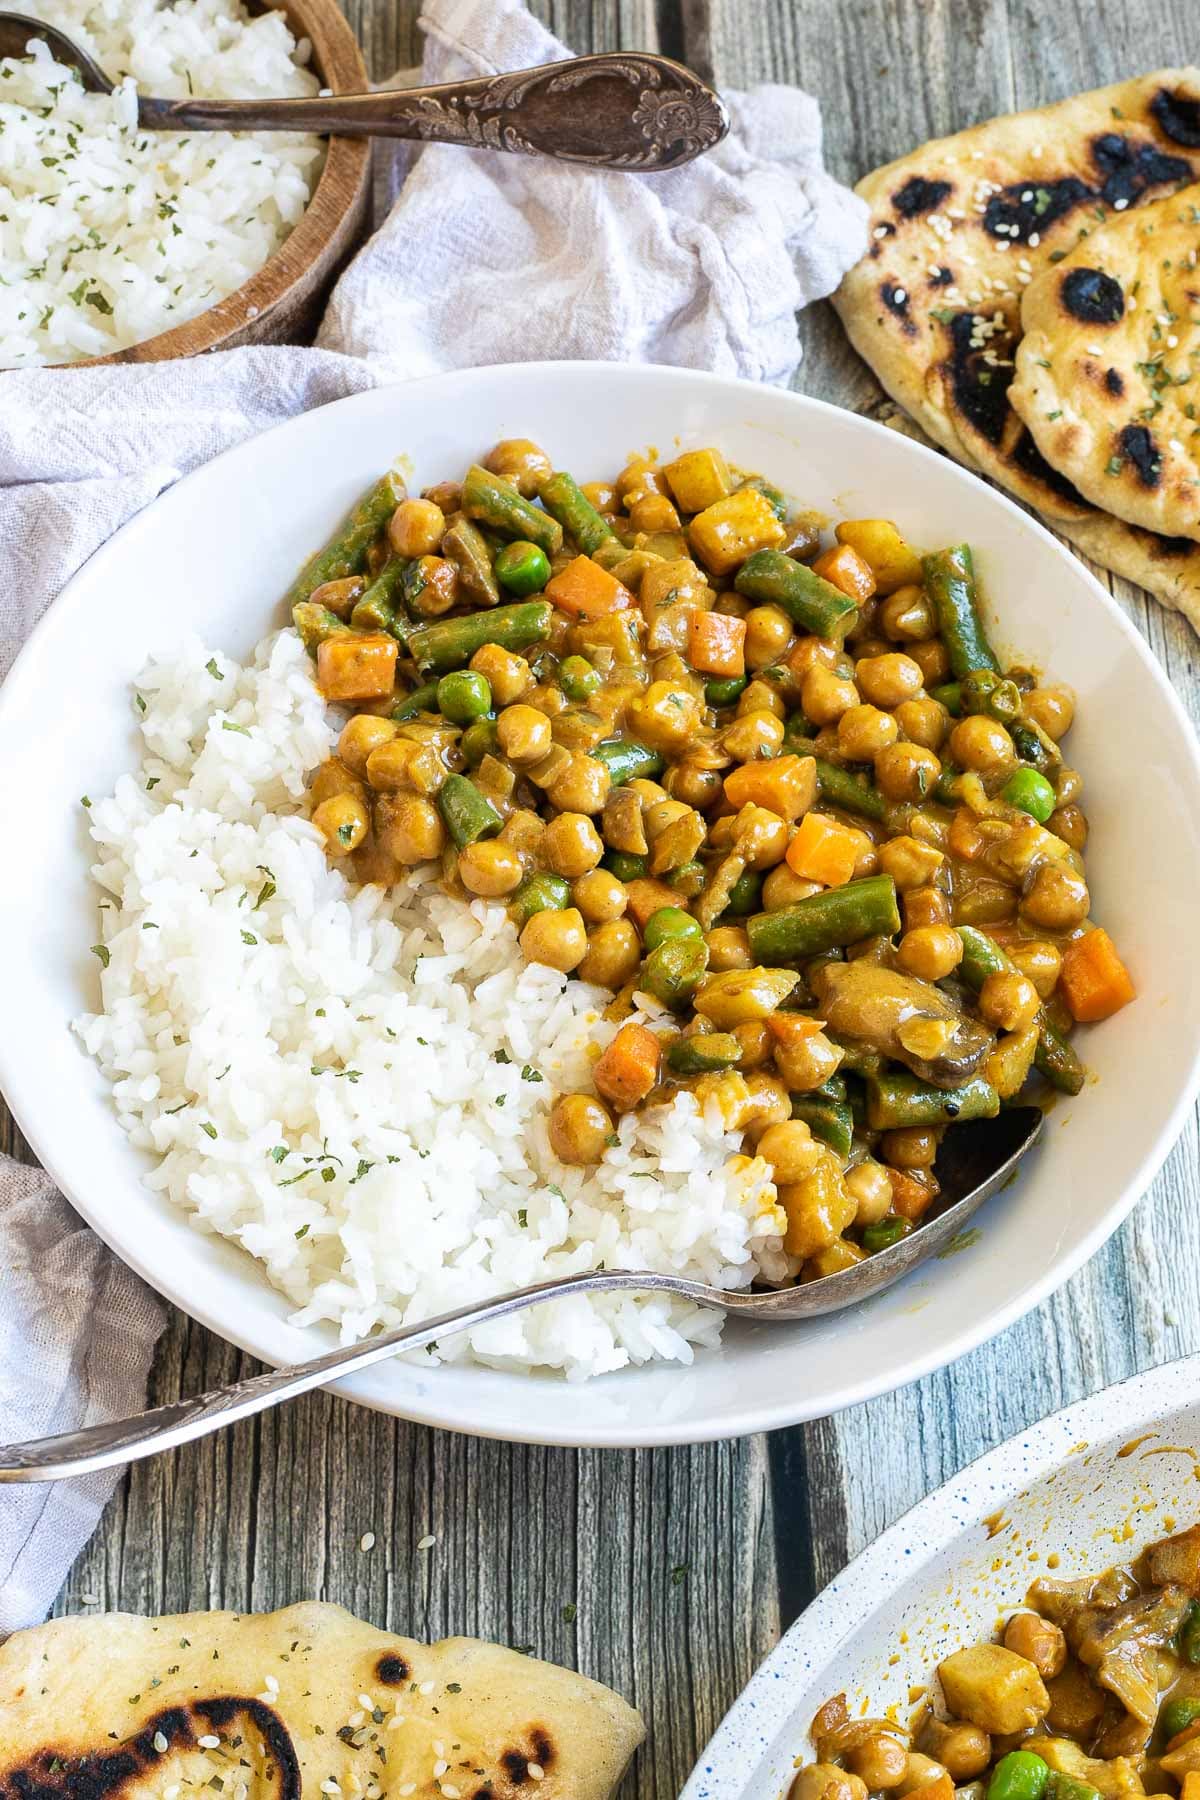 White plate with rice and different chopped vegetables, green peas, green beans, and chickpeas. Leftovers are next to it in the frying pan. Naan bread and more rice are on the side.